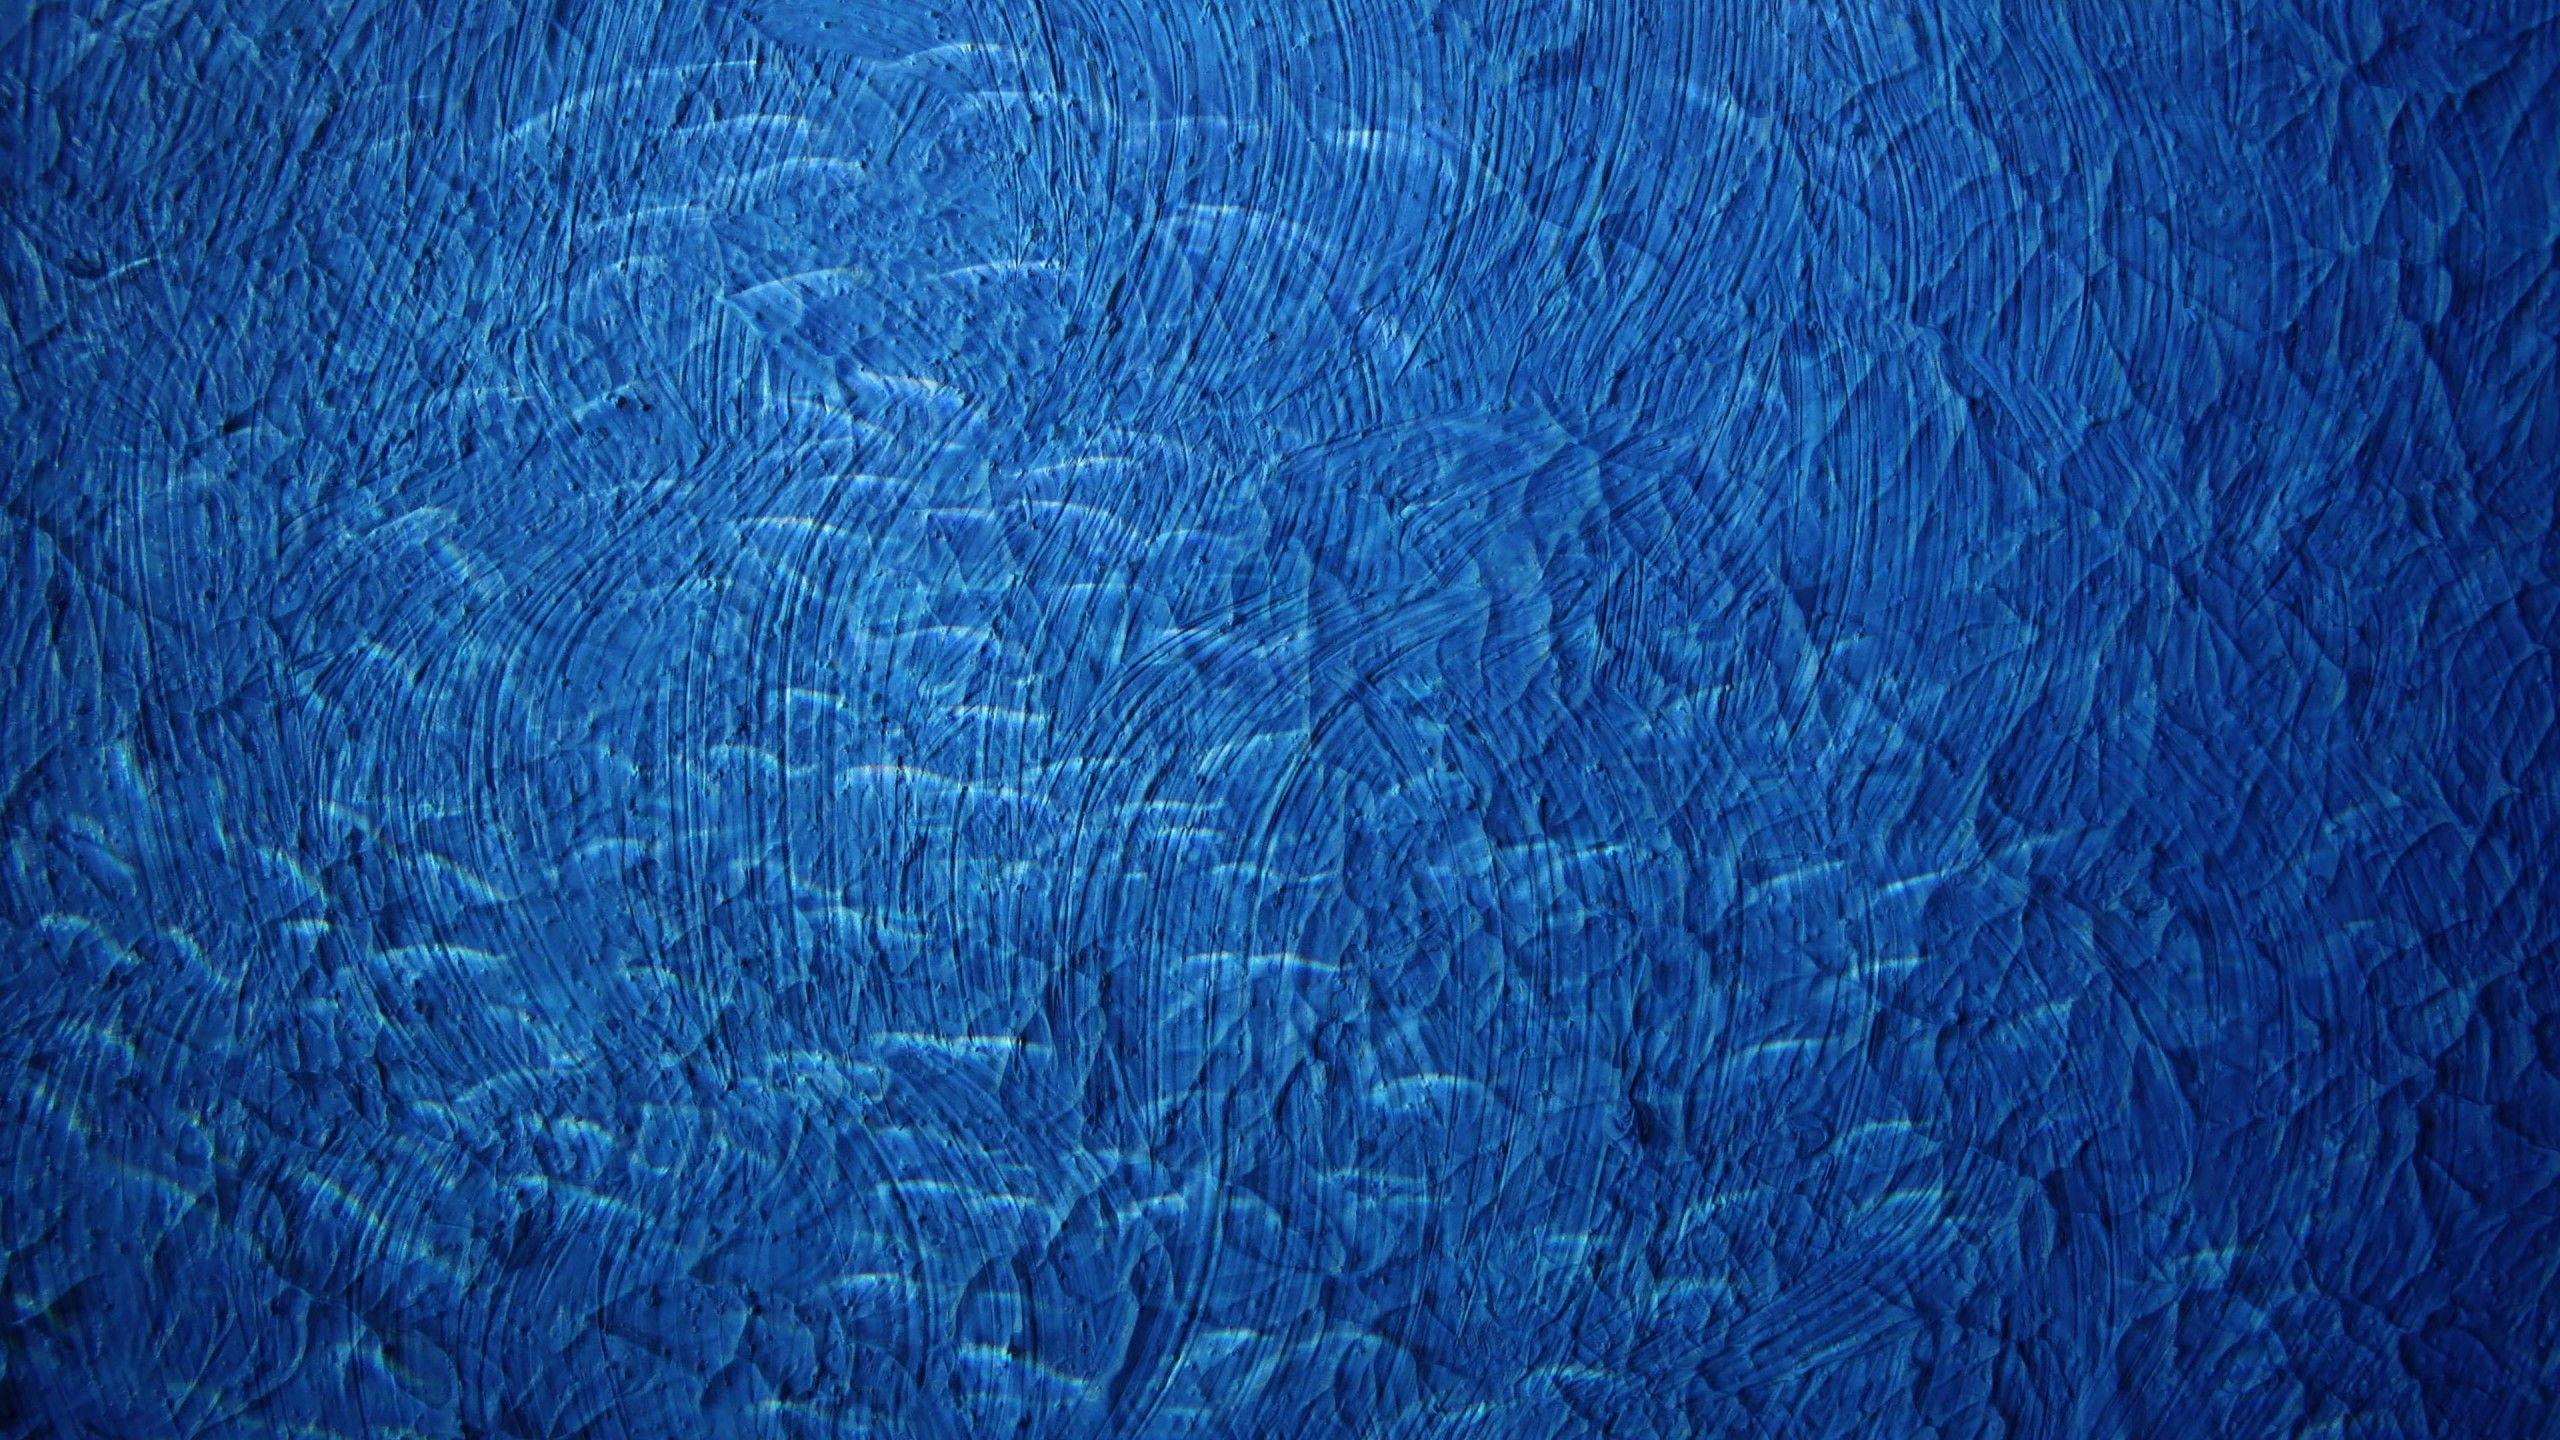 Wallpaper.wiki Art Imges Blue Textured PIC WPC008988